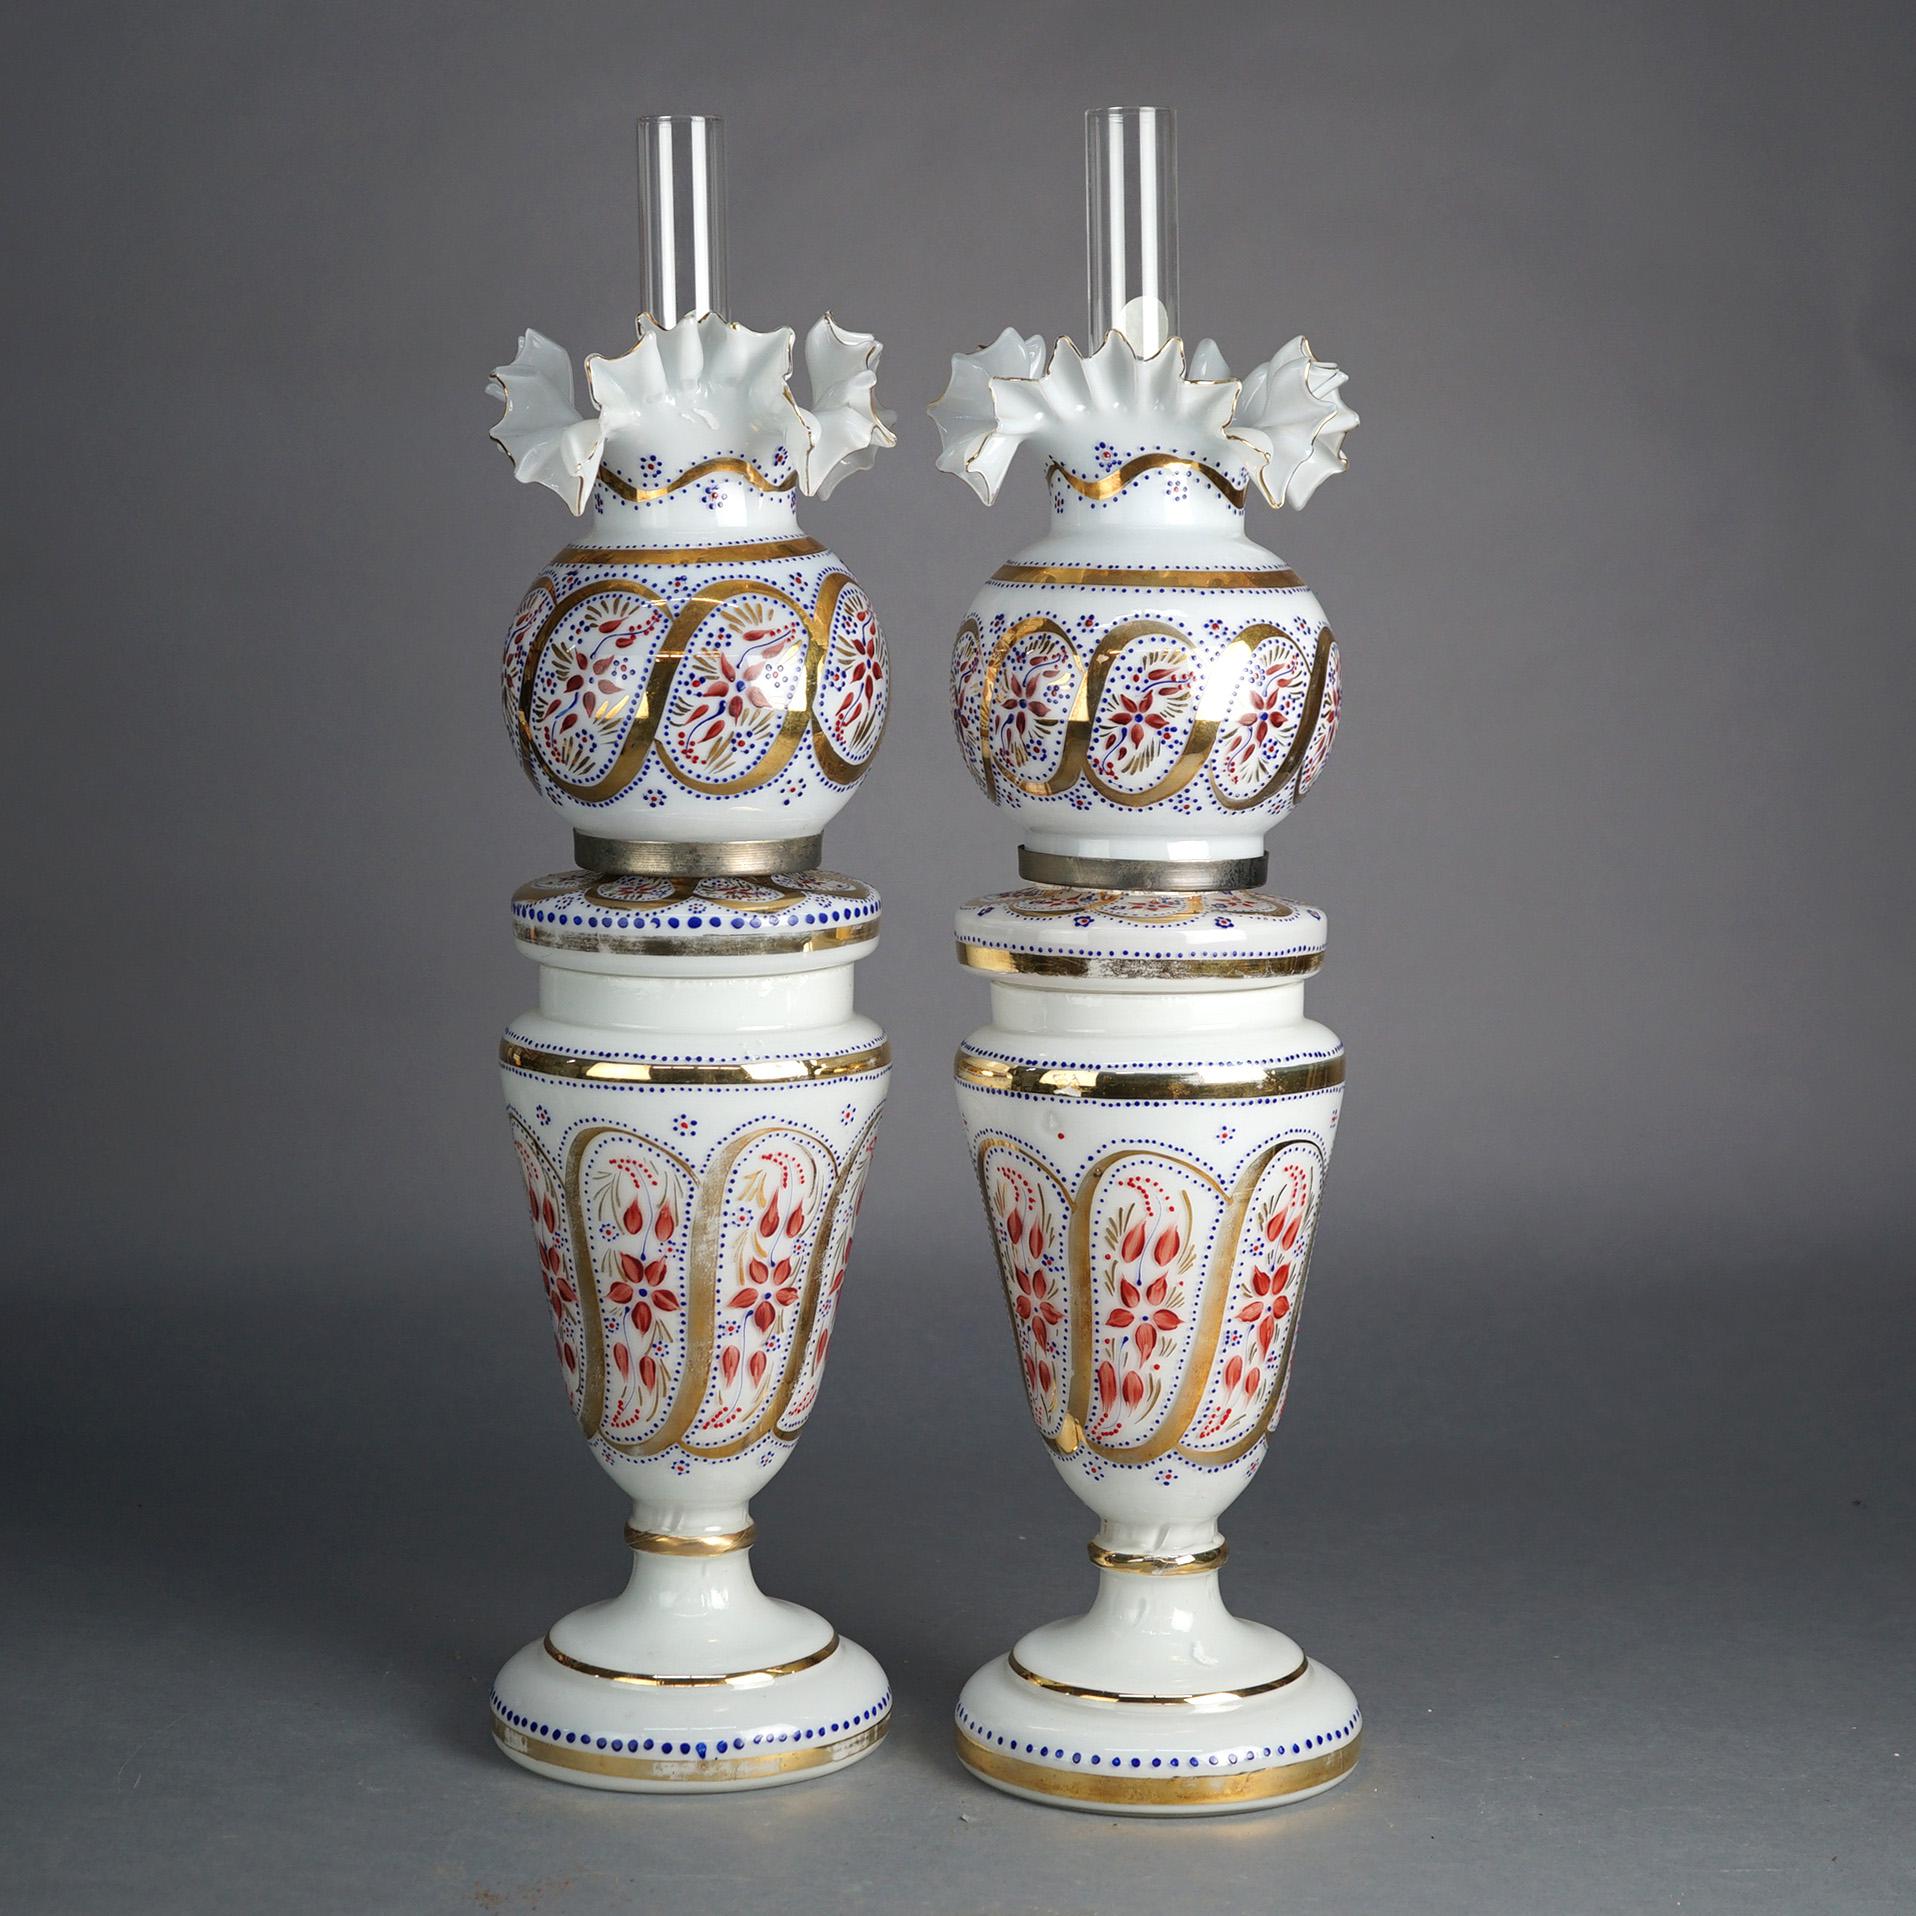 19th Century Antique Pair Opaline Floral Enameled Hand Painted Lamps With Handkerchief Shades For Sale